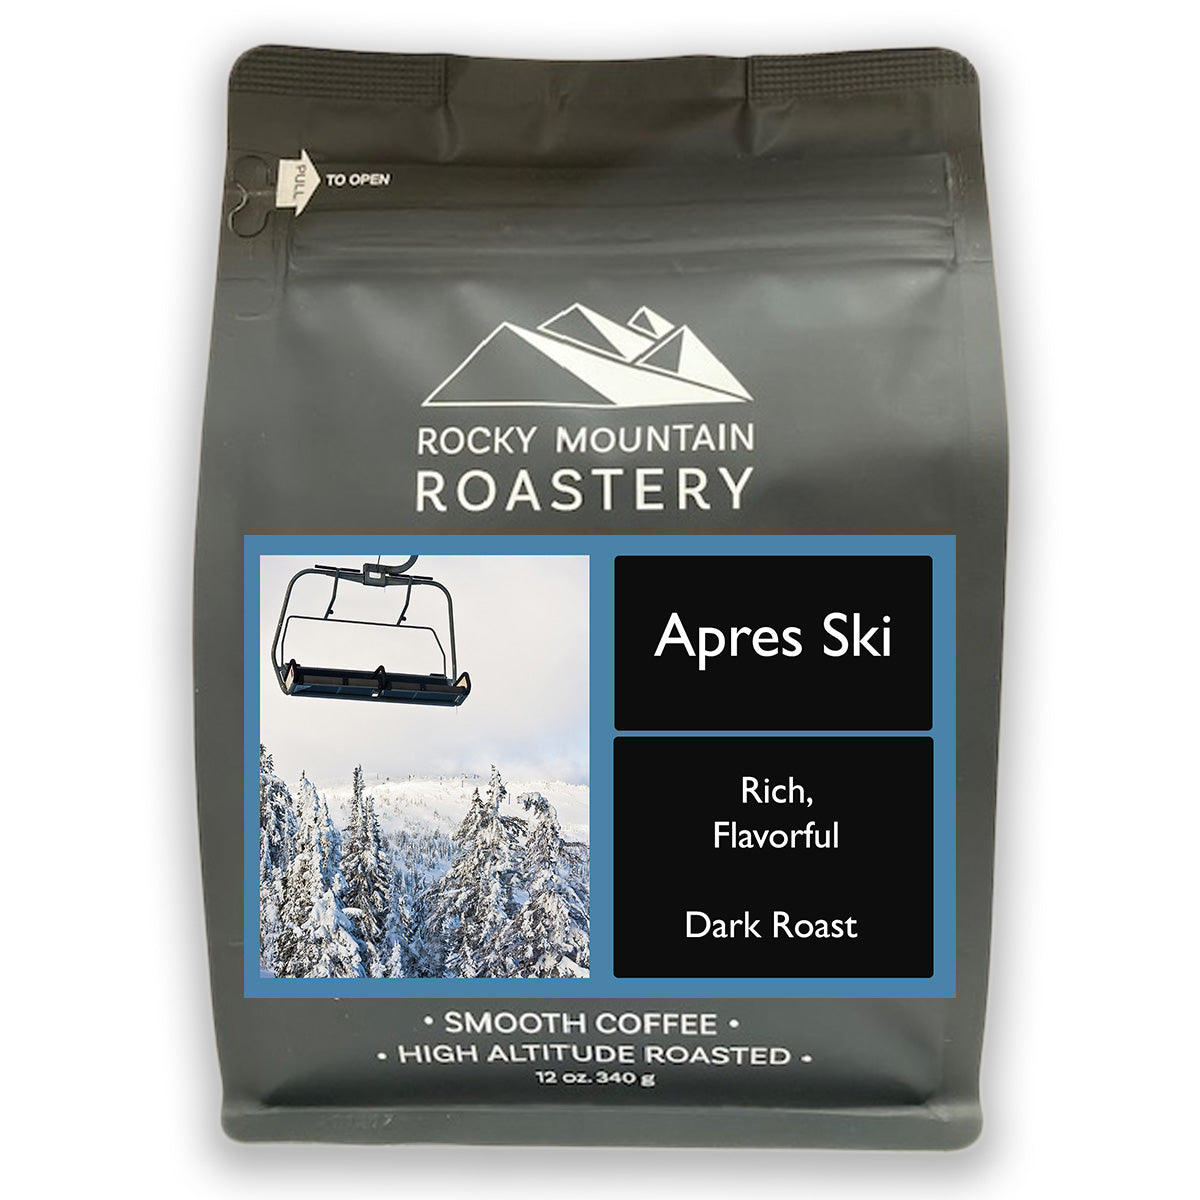 Picture of a bag of Apres Ski Coffee